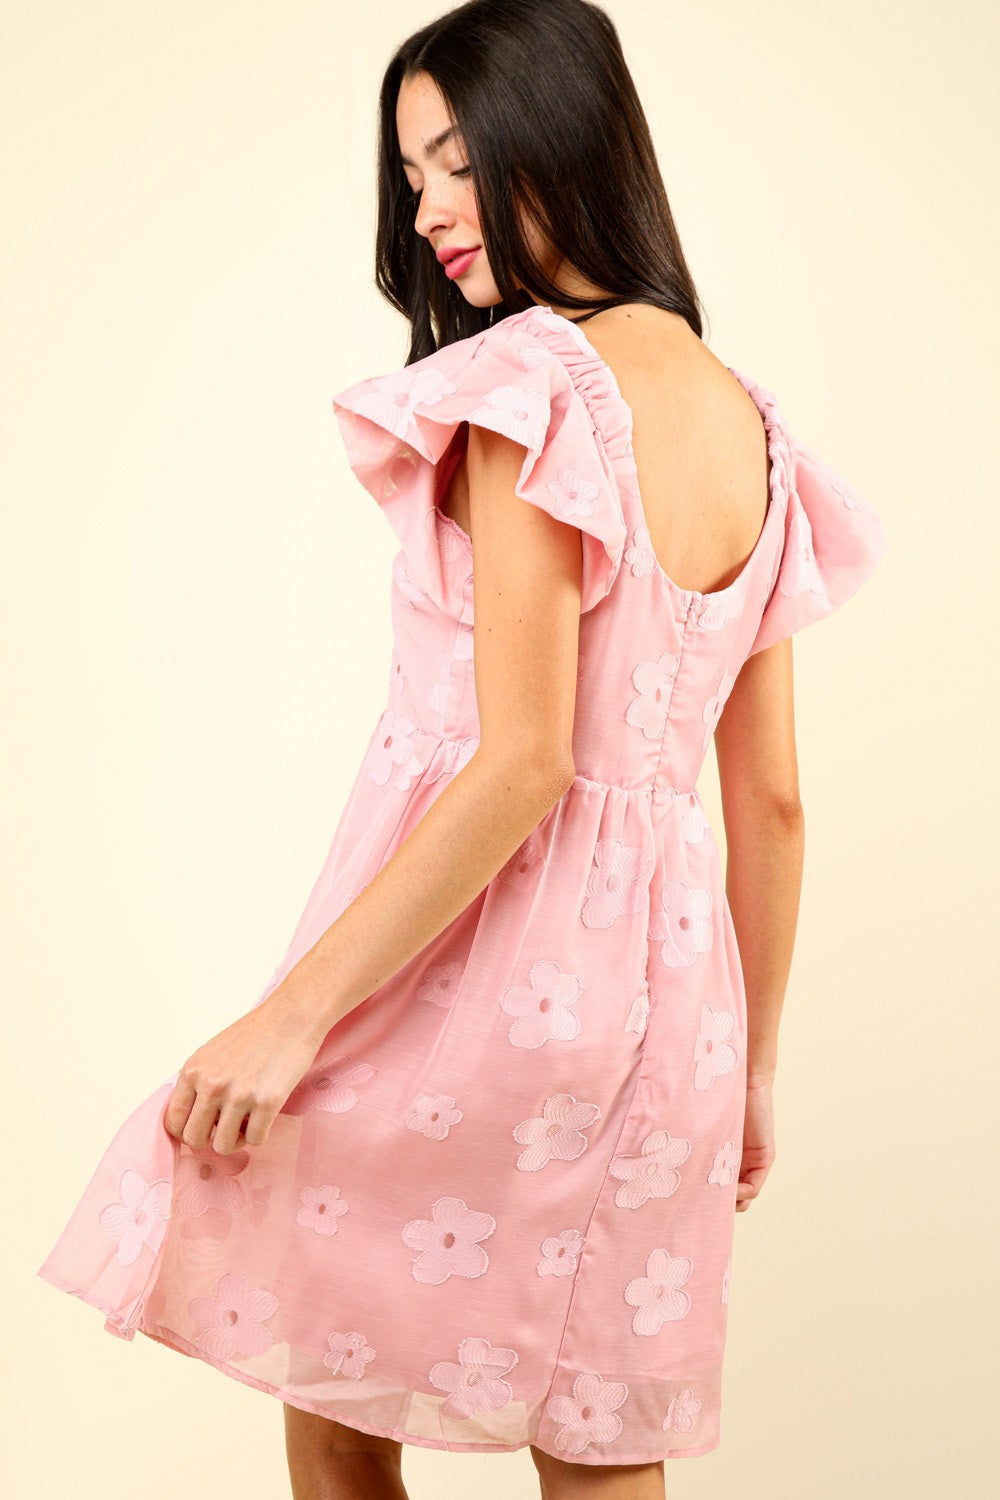 Charm in the VERY J Organza Dress with elegant floral embroidery, perfect for spring occasions and versatile style.